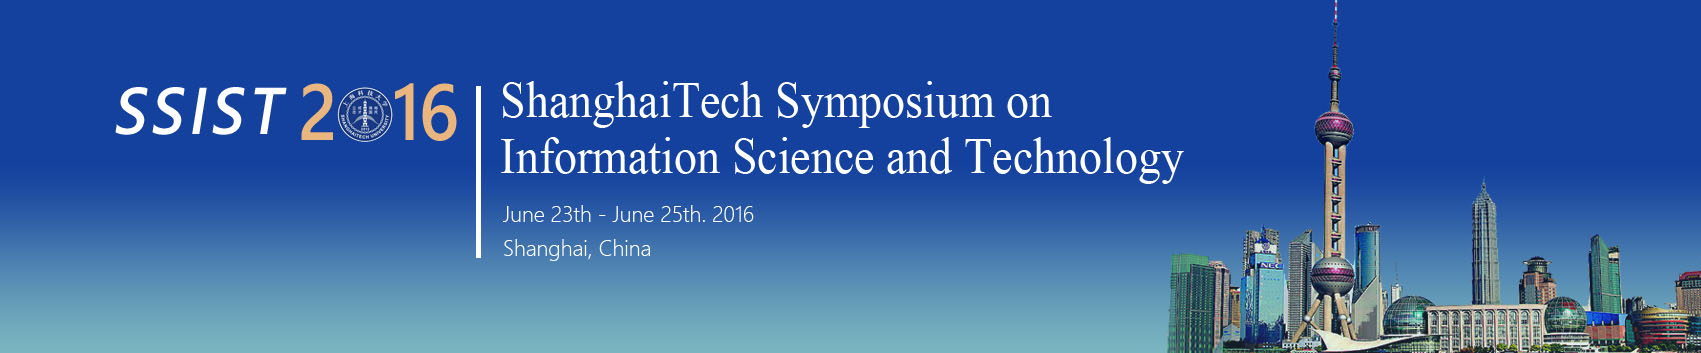 ShanghaiTech Symposium on Information and Science and Technology